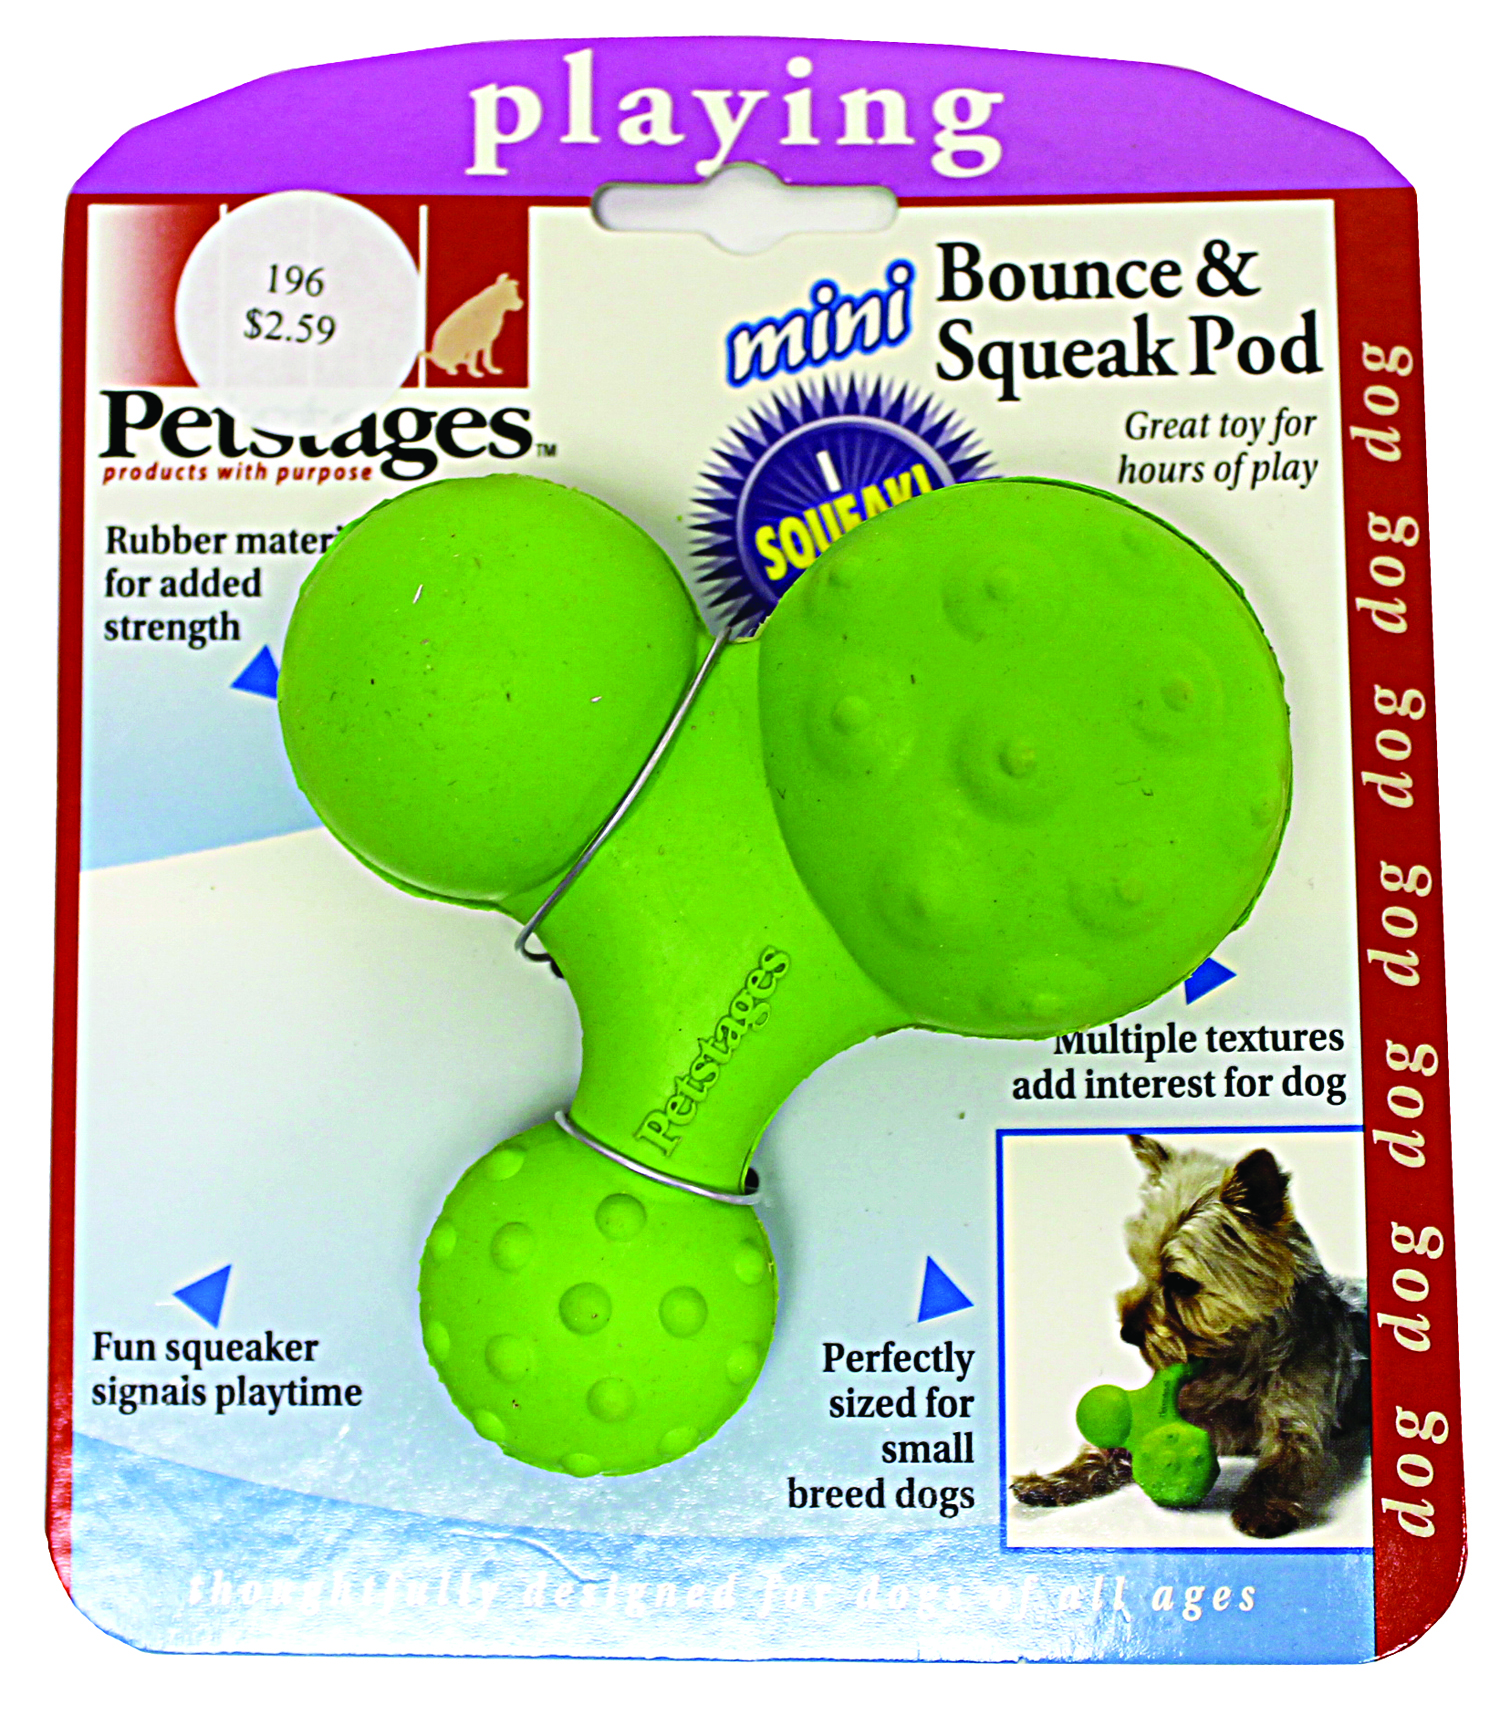 BOUNCE AND SQUEAK POD